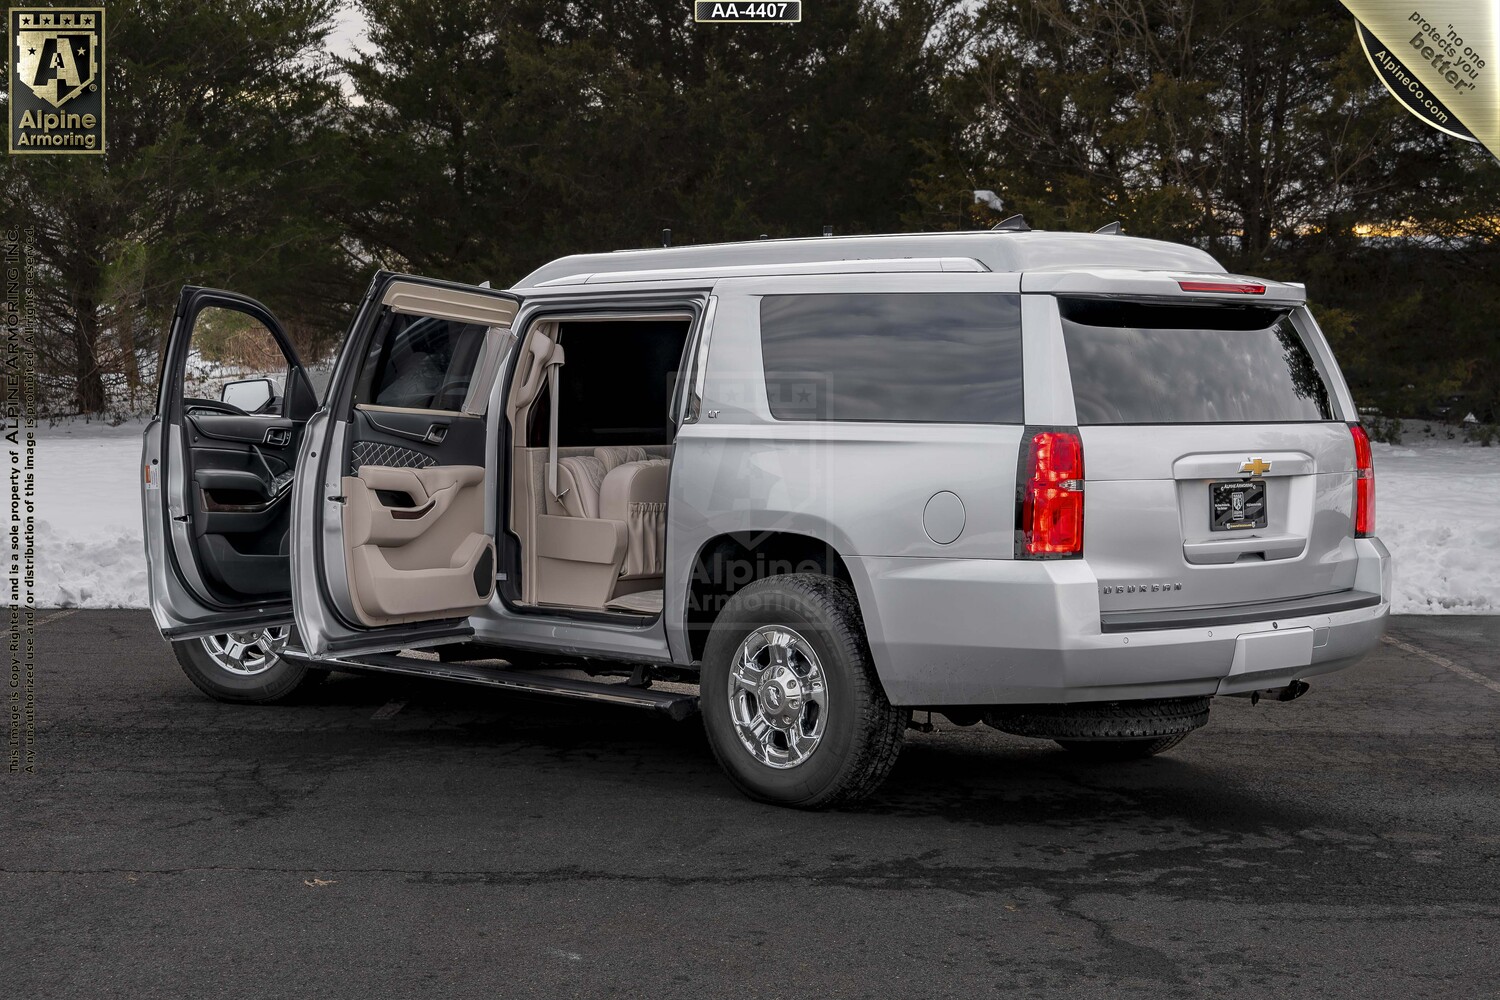 Inventory armored Chevrolet Suburban 3500HD LT Limo Level A11/B7 Exterior & Interior Images VIN:4407